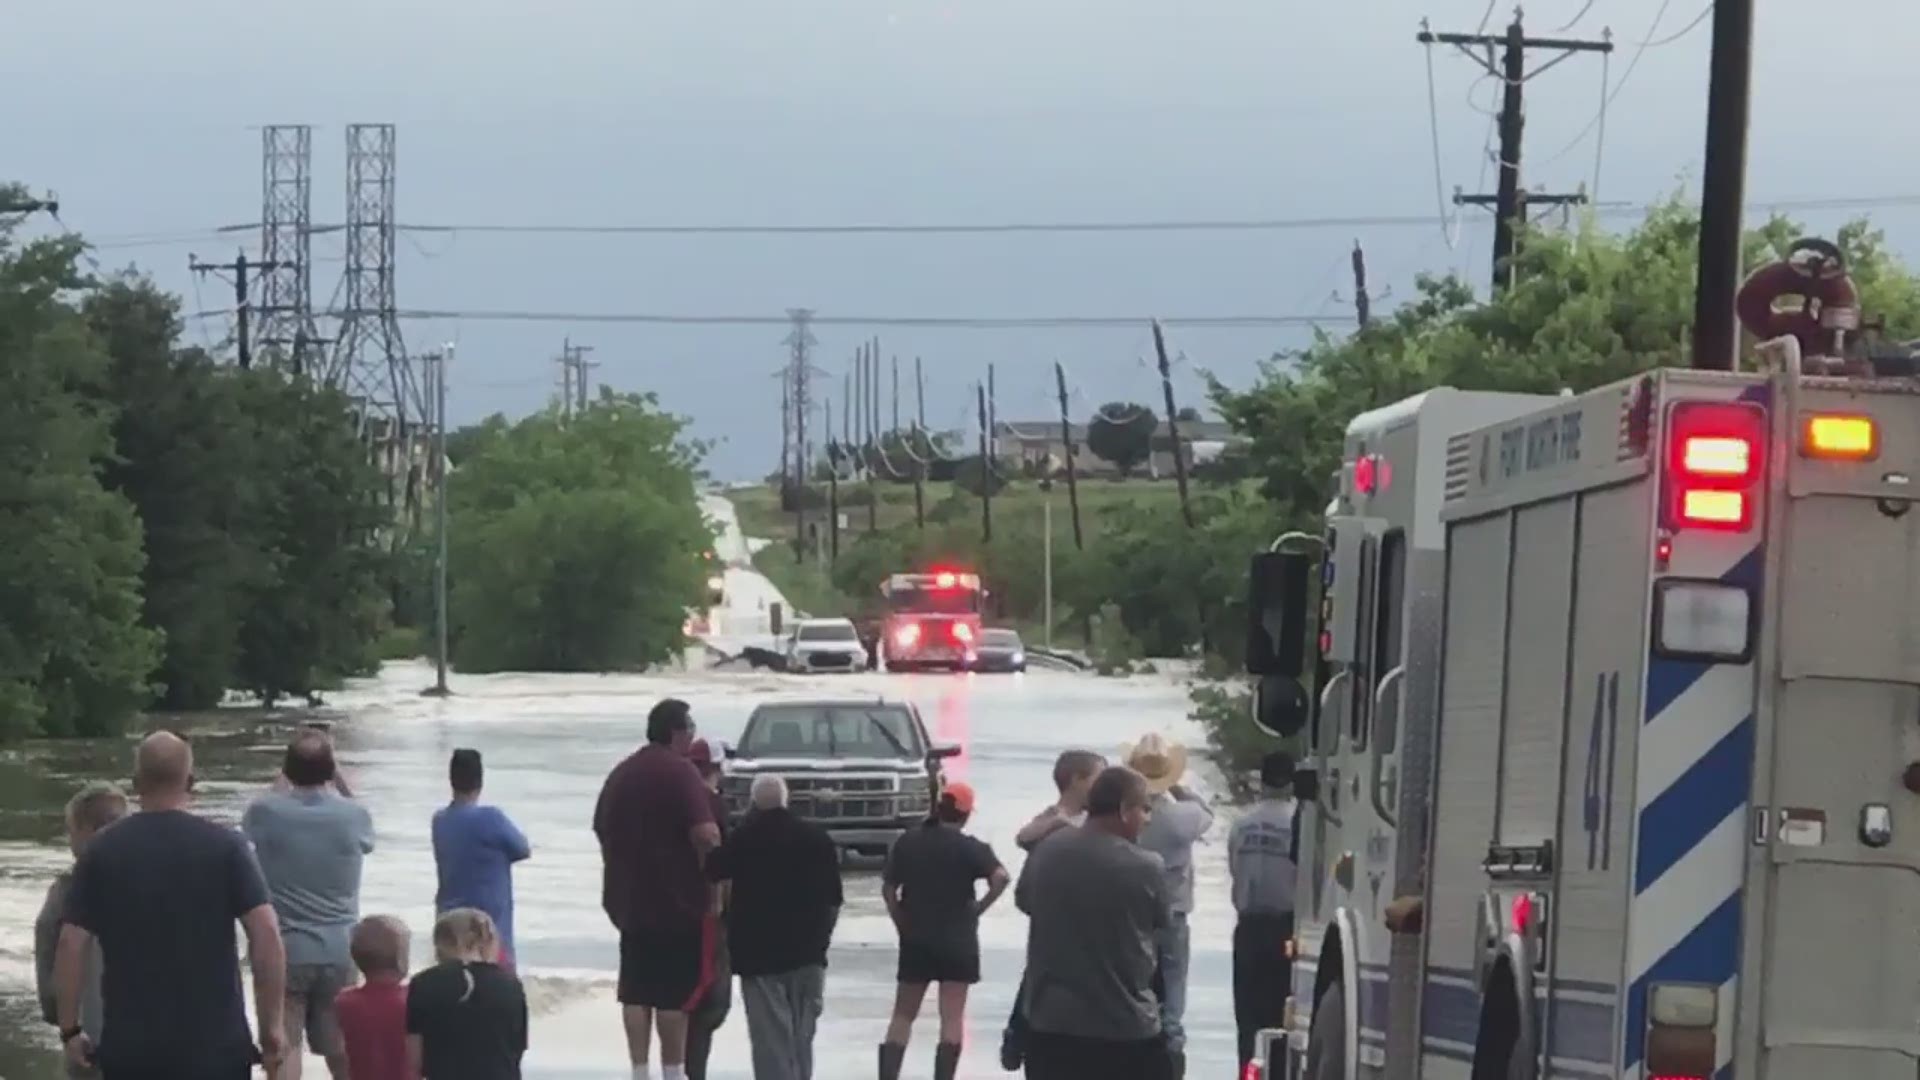 Flooding in north Fort Worth, Wagley Robertson Road where it crosses Big Fossil Creek (between Bonds Ranch and Bailey Boswell).